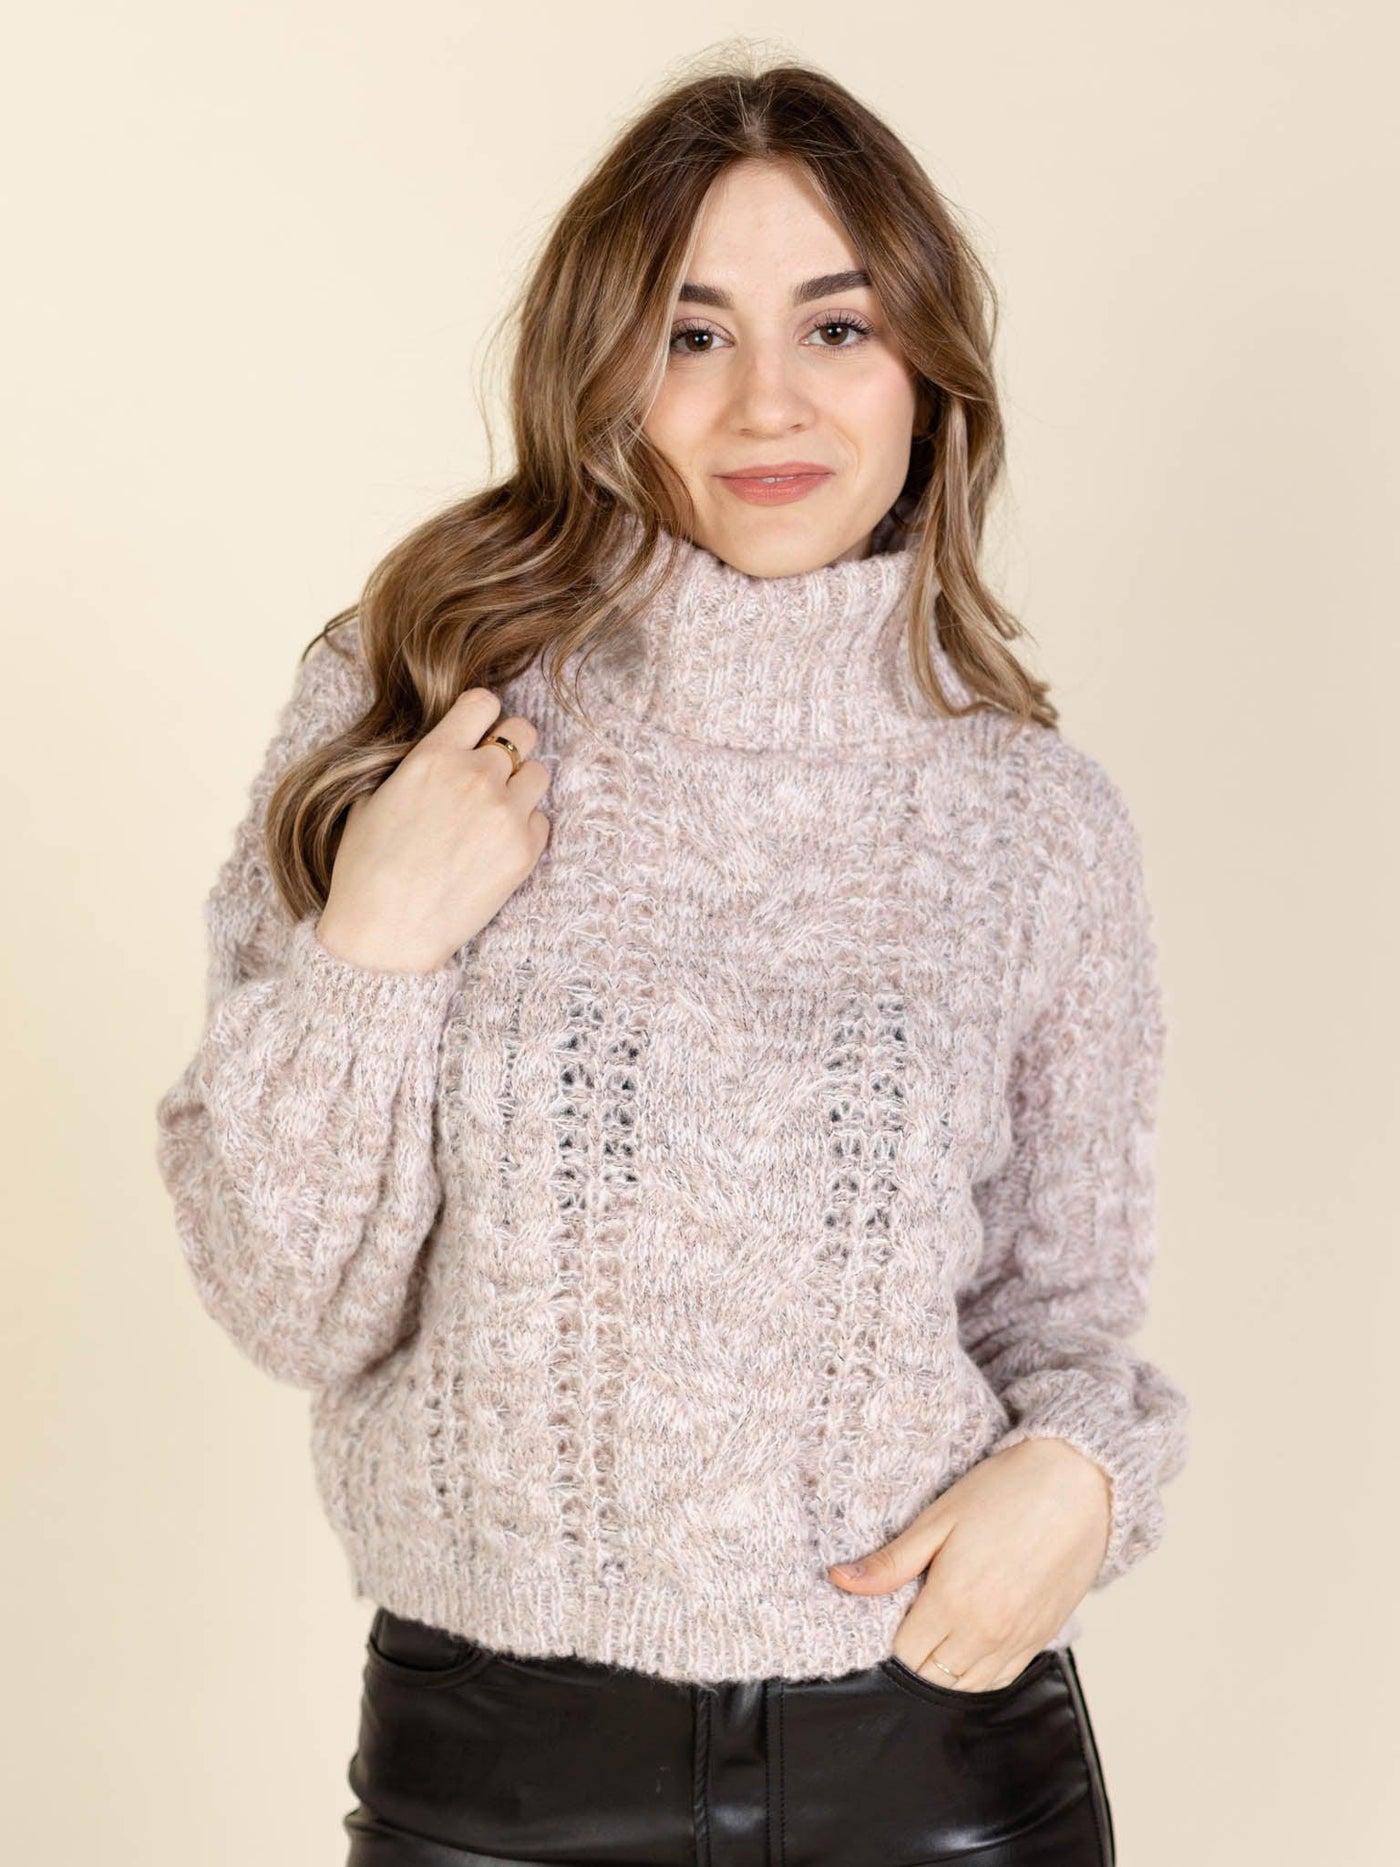 slouchy sweater